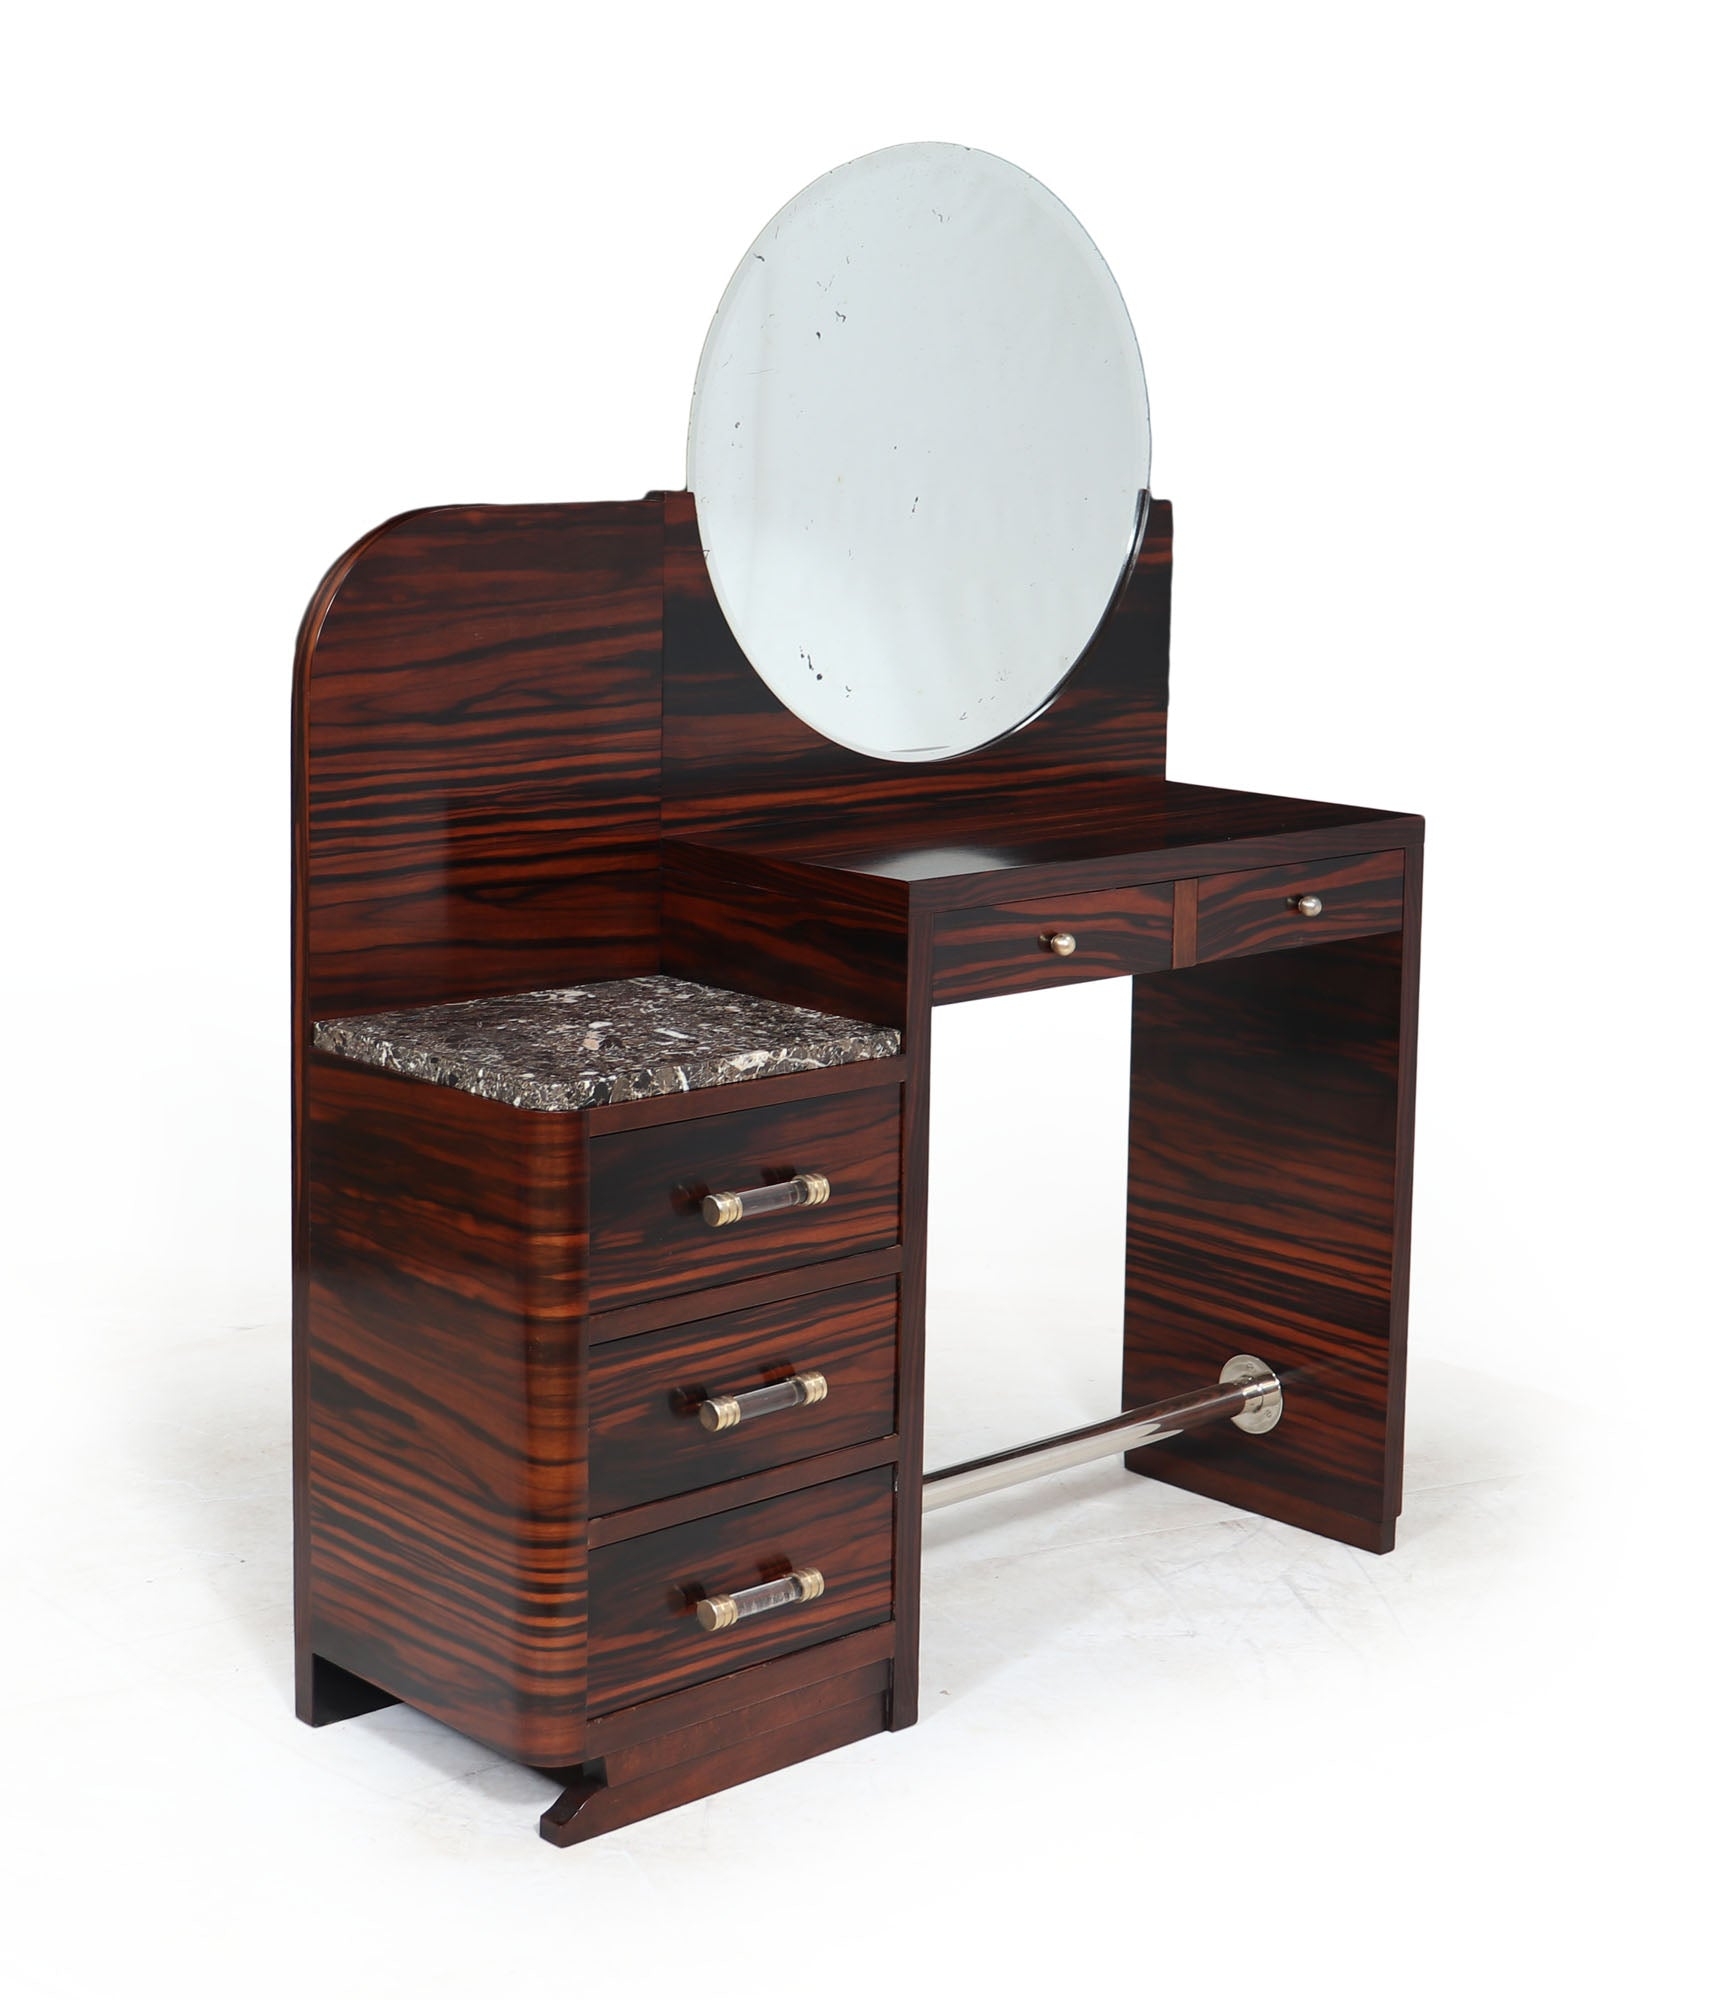 French Art Deco Dressing Table – The Furniture Rooms